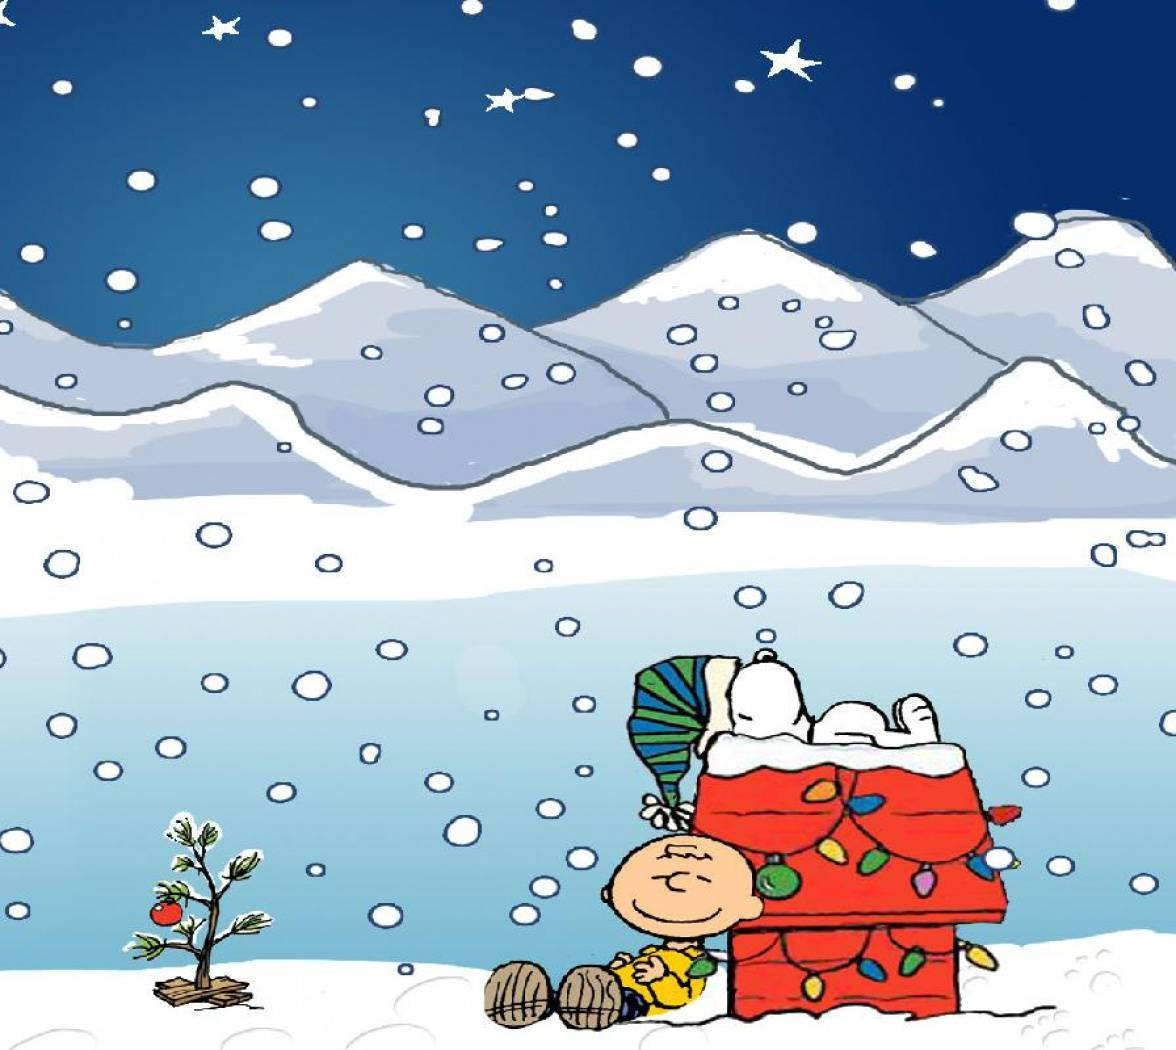 Celebrate the holidays with Snoopy! Wallpaper